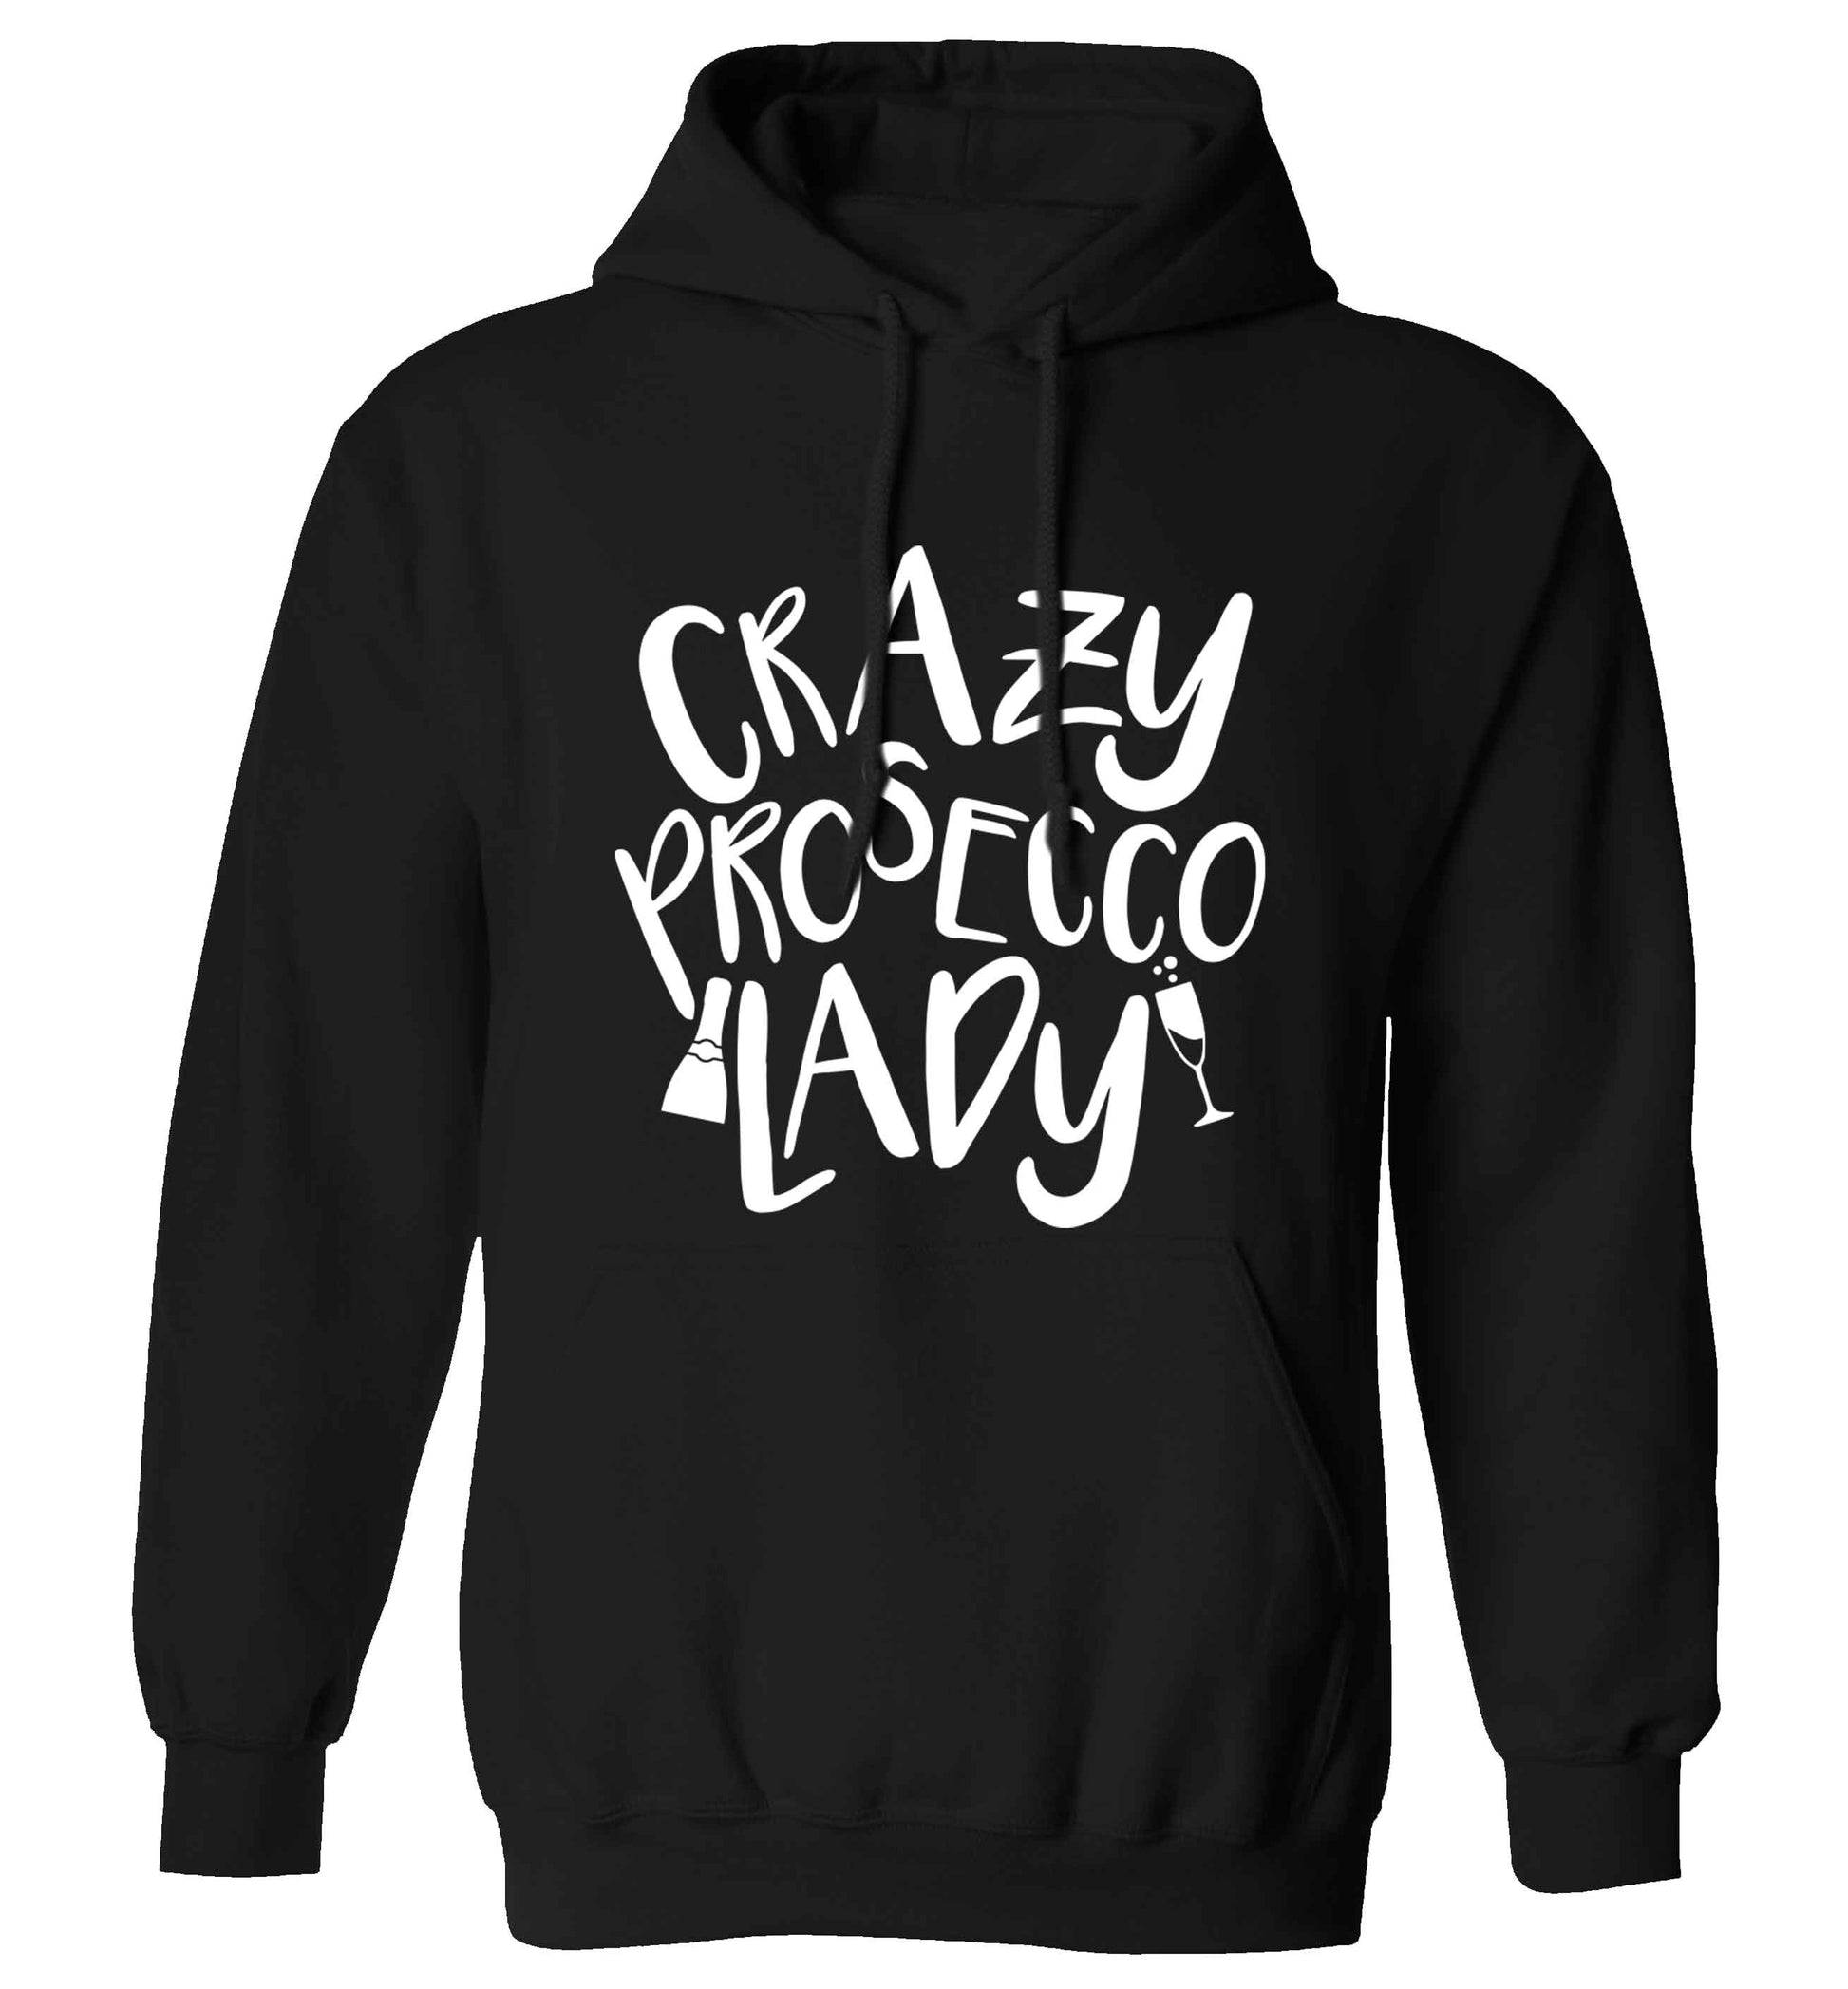 Crazy prosecco lady adults unisex black hoodie 2XL